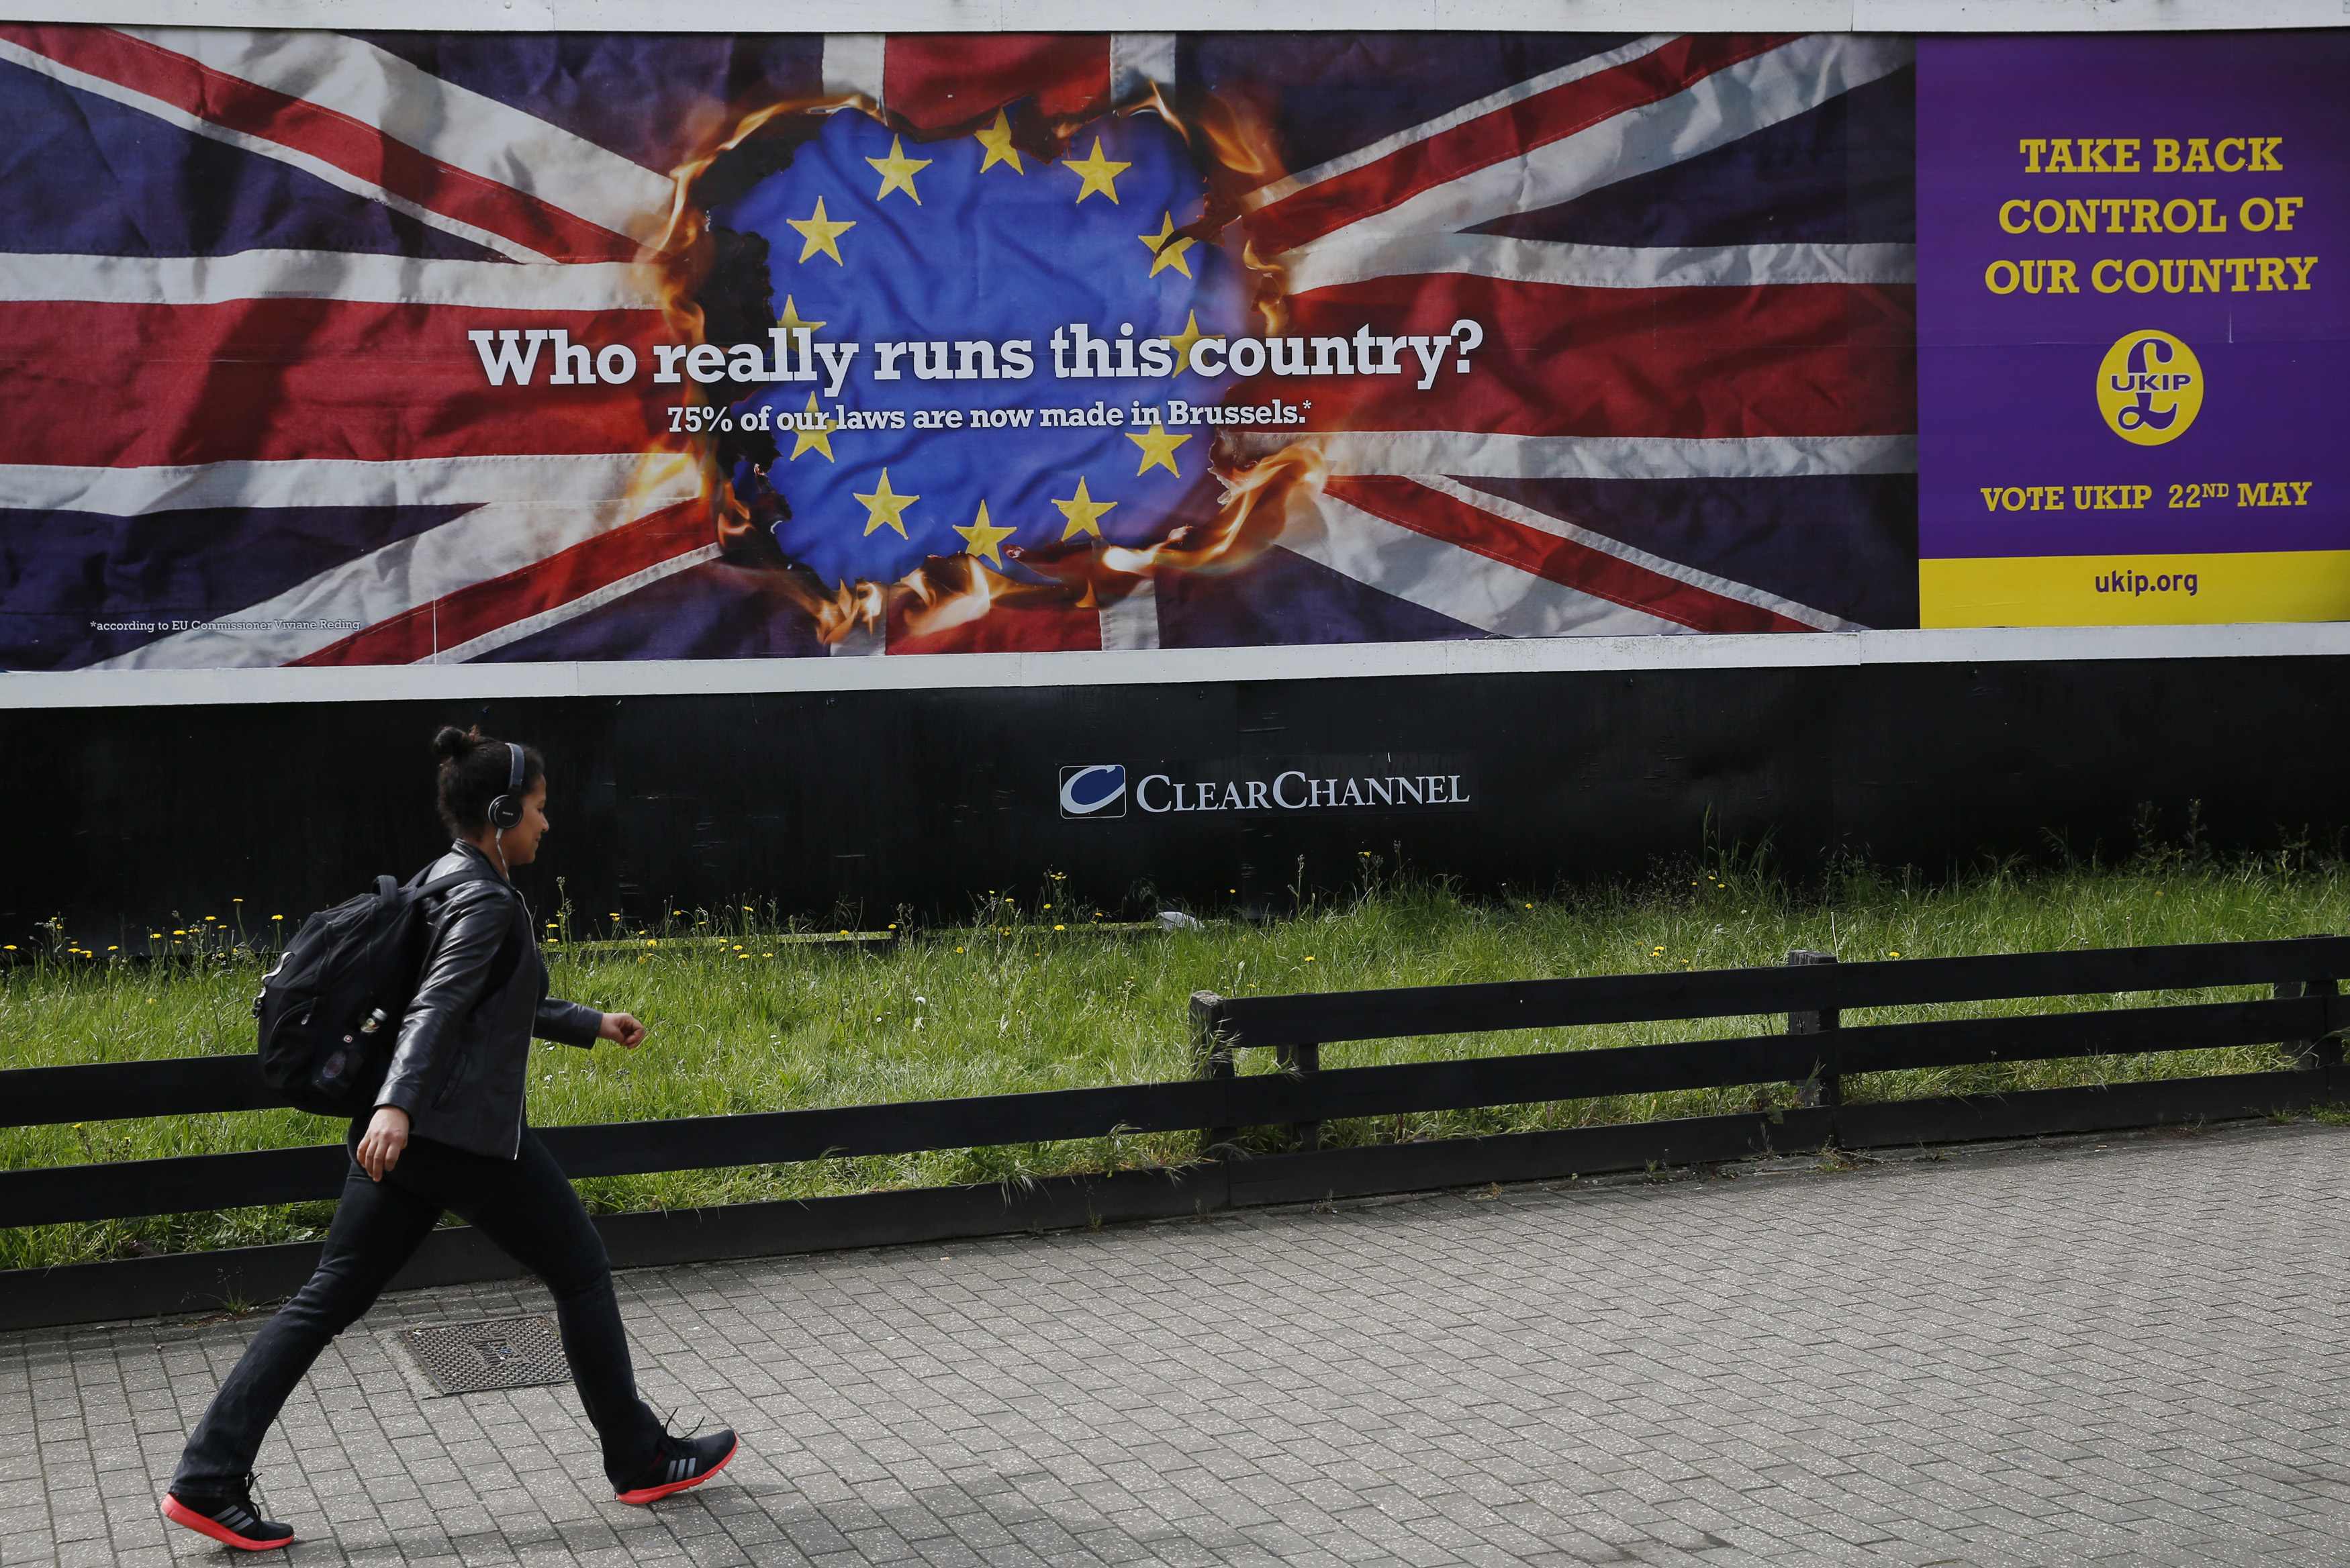 Spooked by Immigration, Disgruntled UK Voters Turn to Anti-EU Party